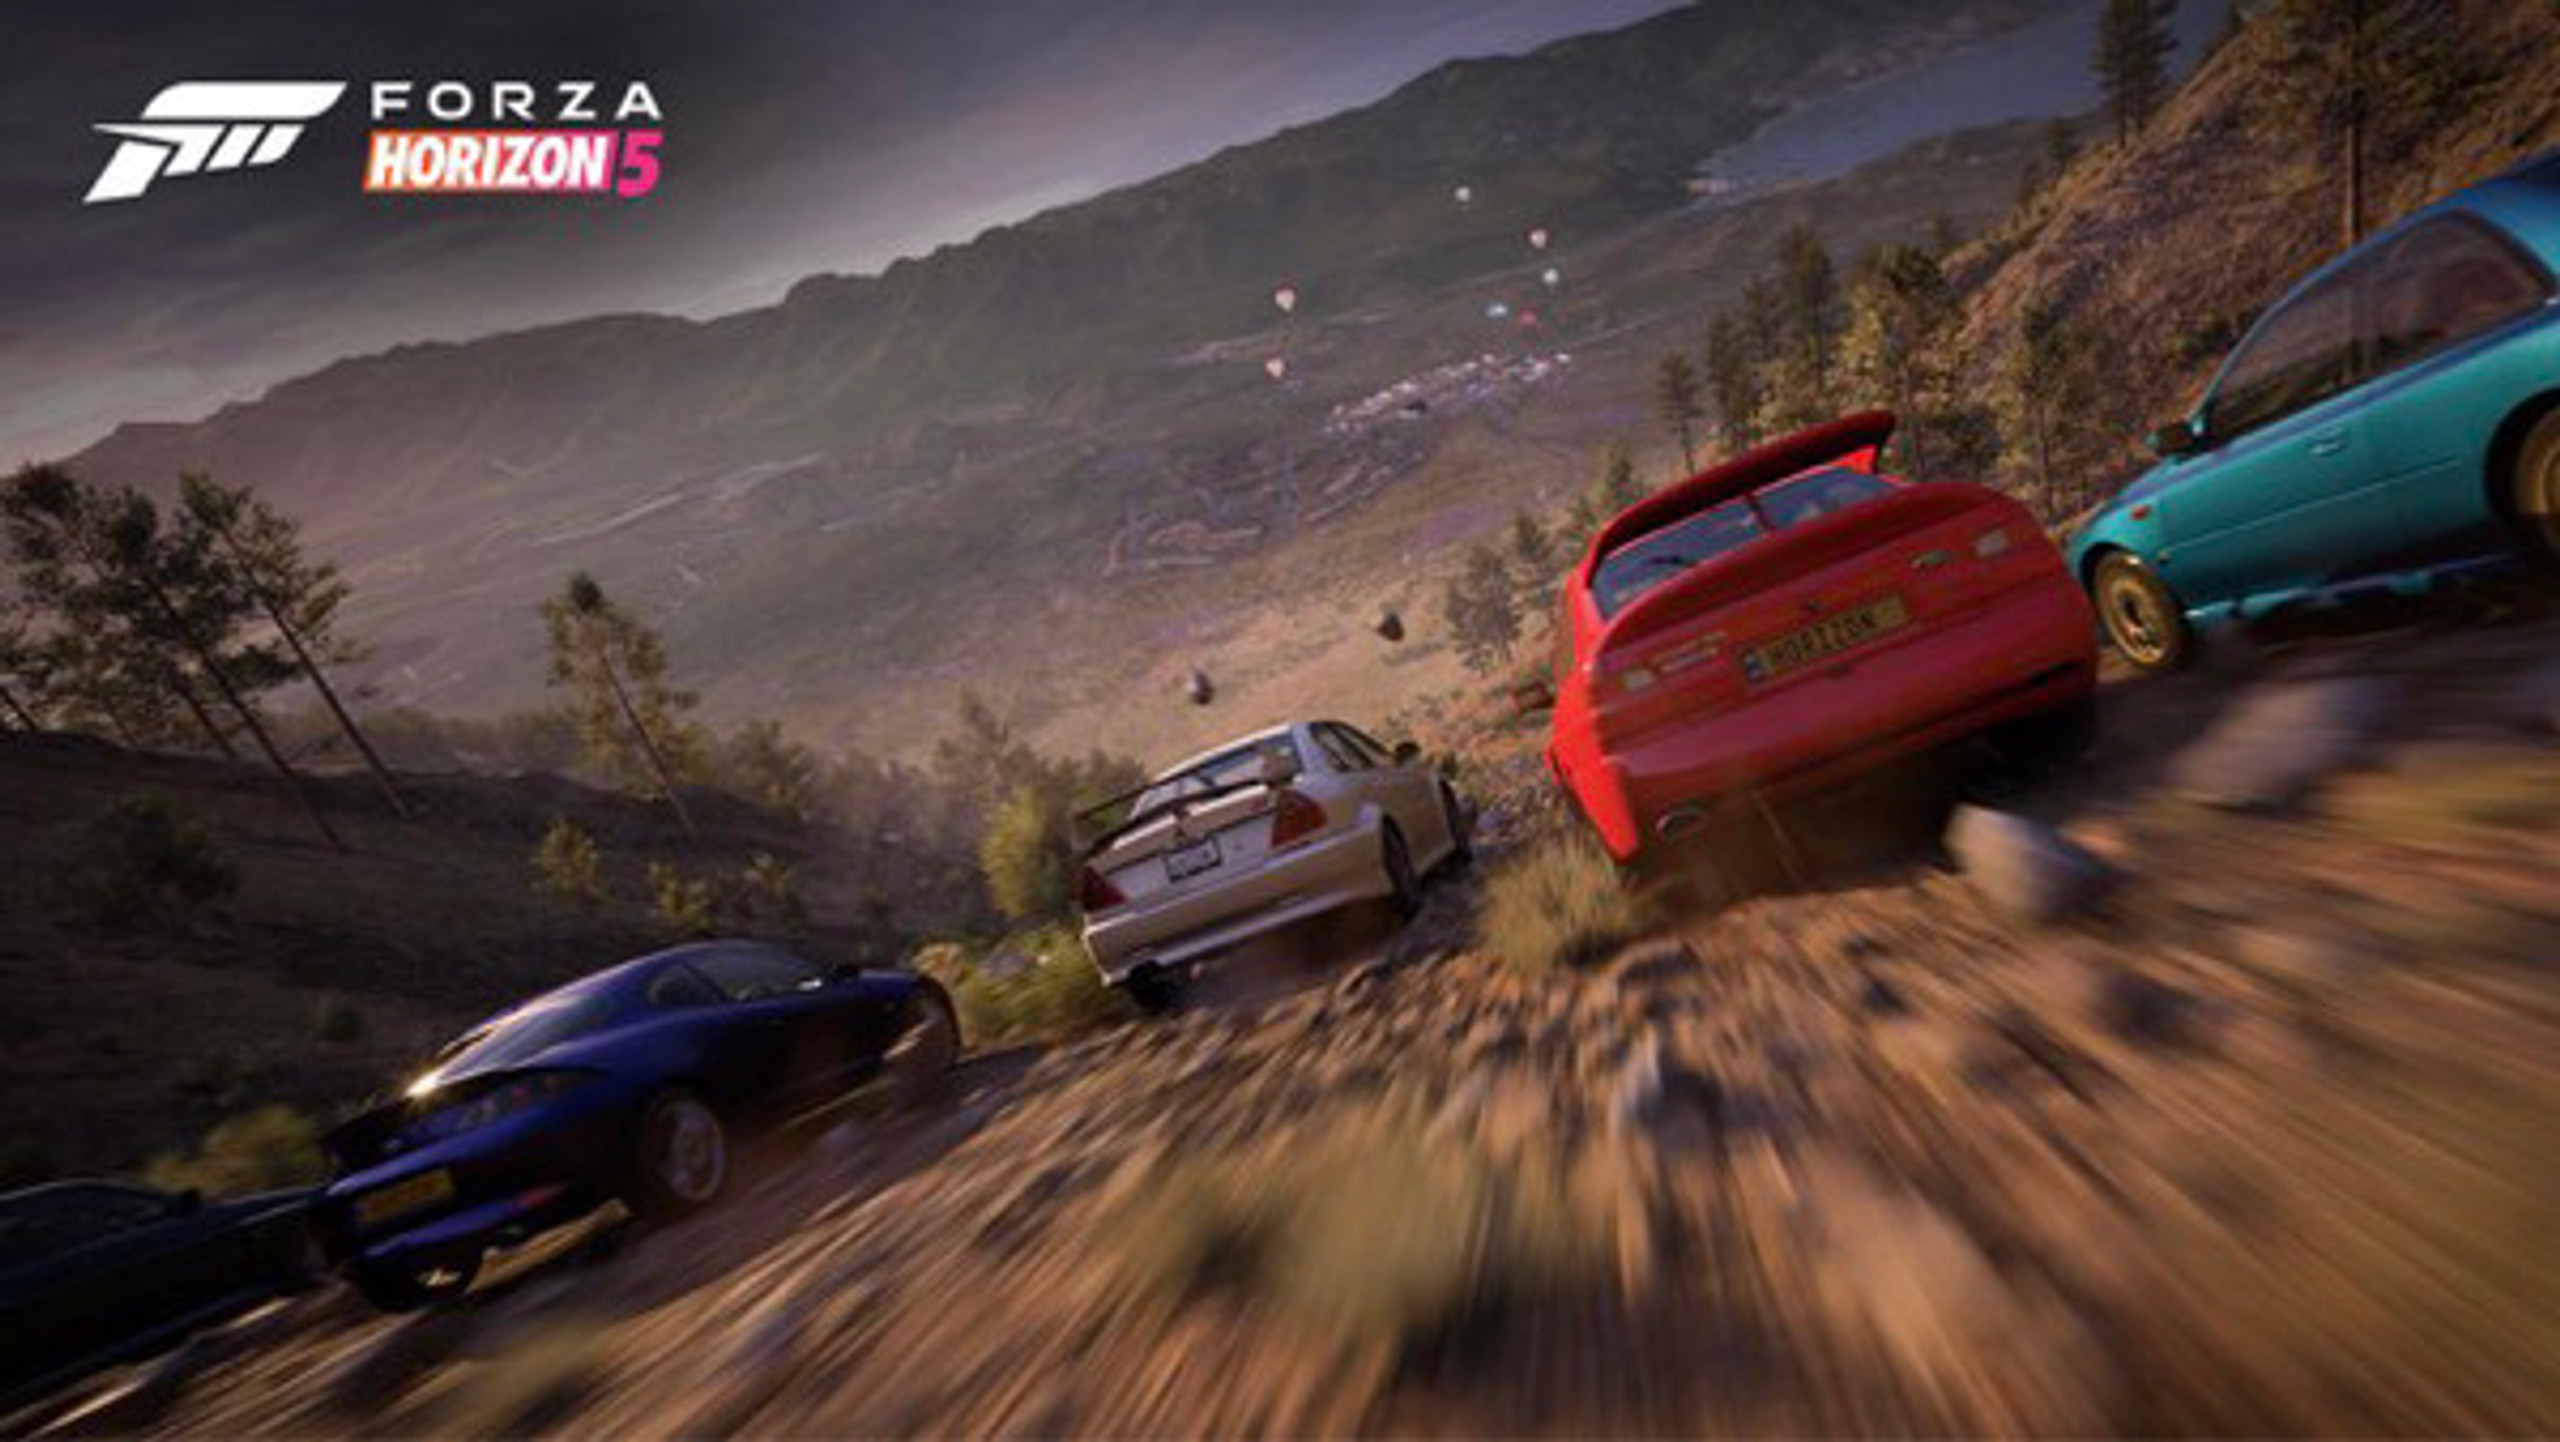 Forza Horizon 5 car tuning guide: What is tuning? how to tune, and